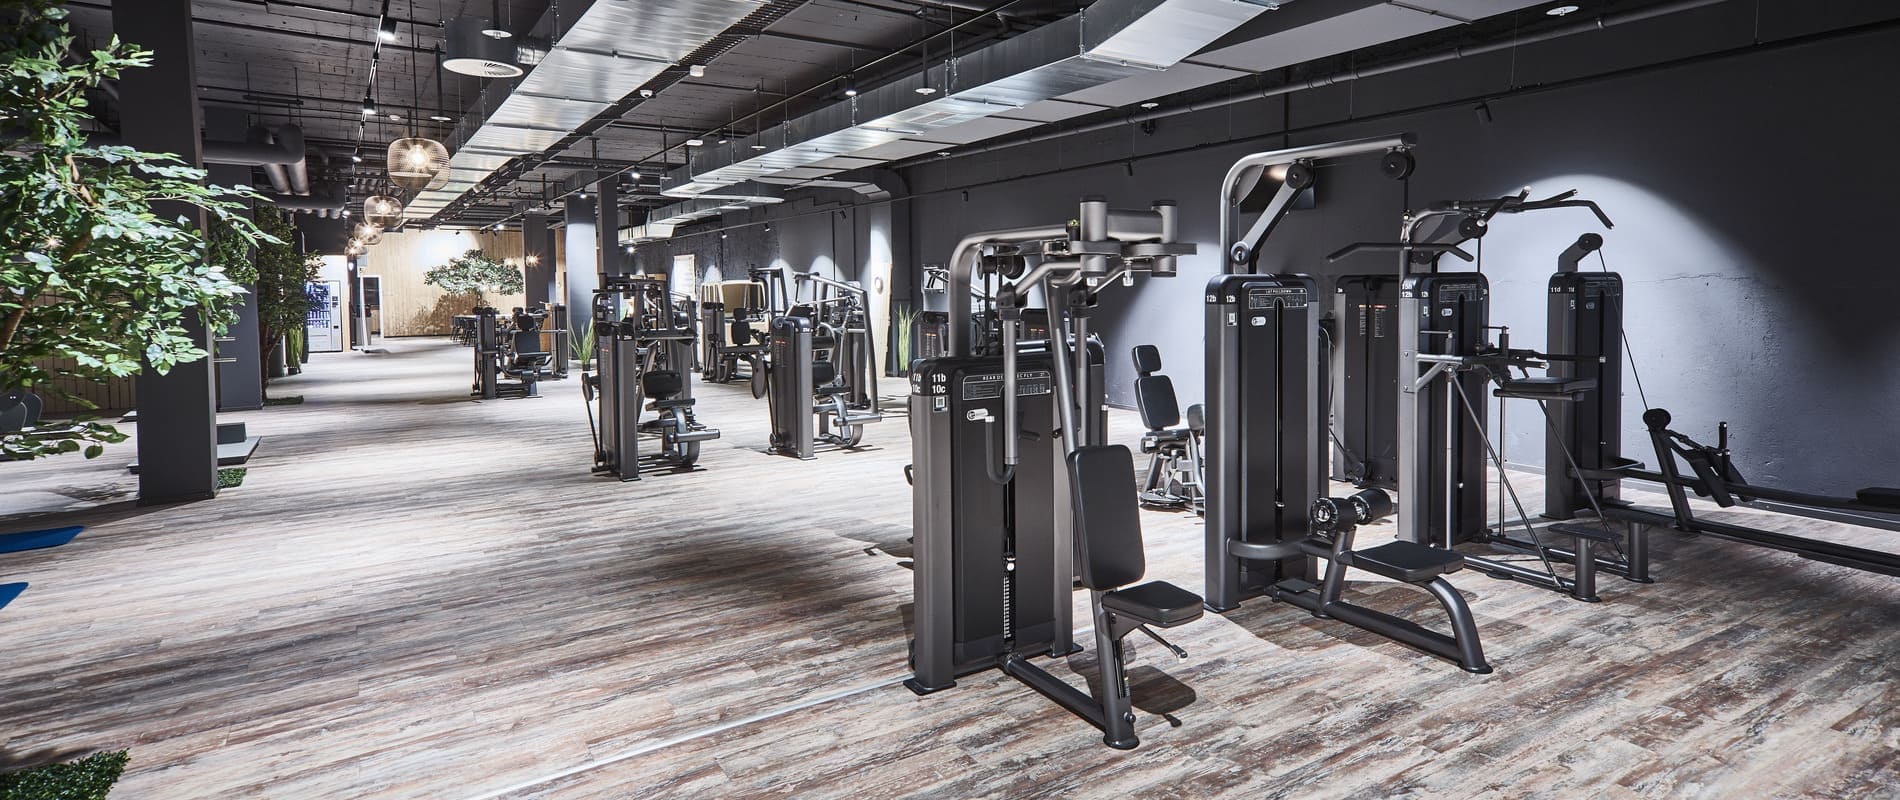 update Fitness Bern Marktgasse / Domaine : force